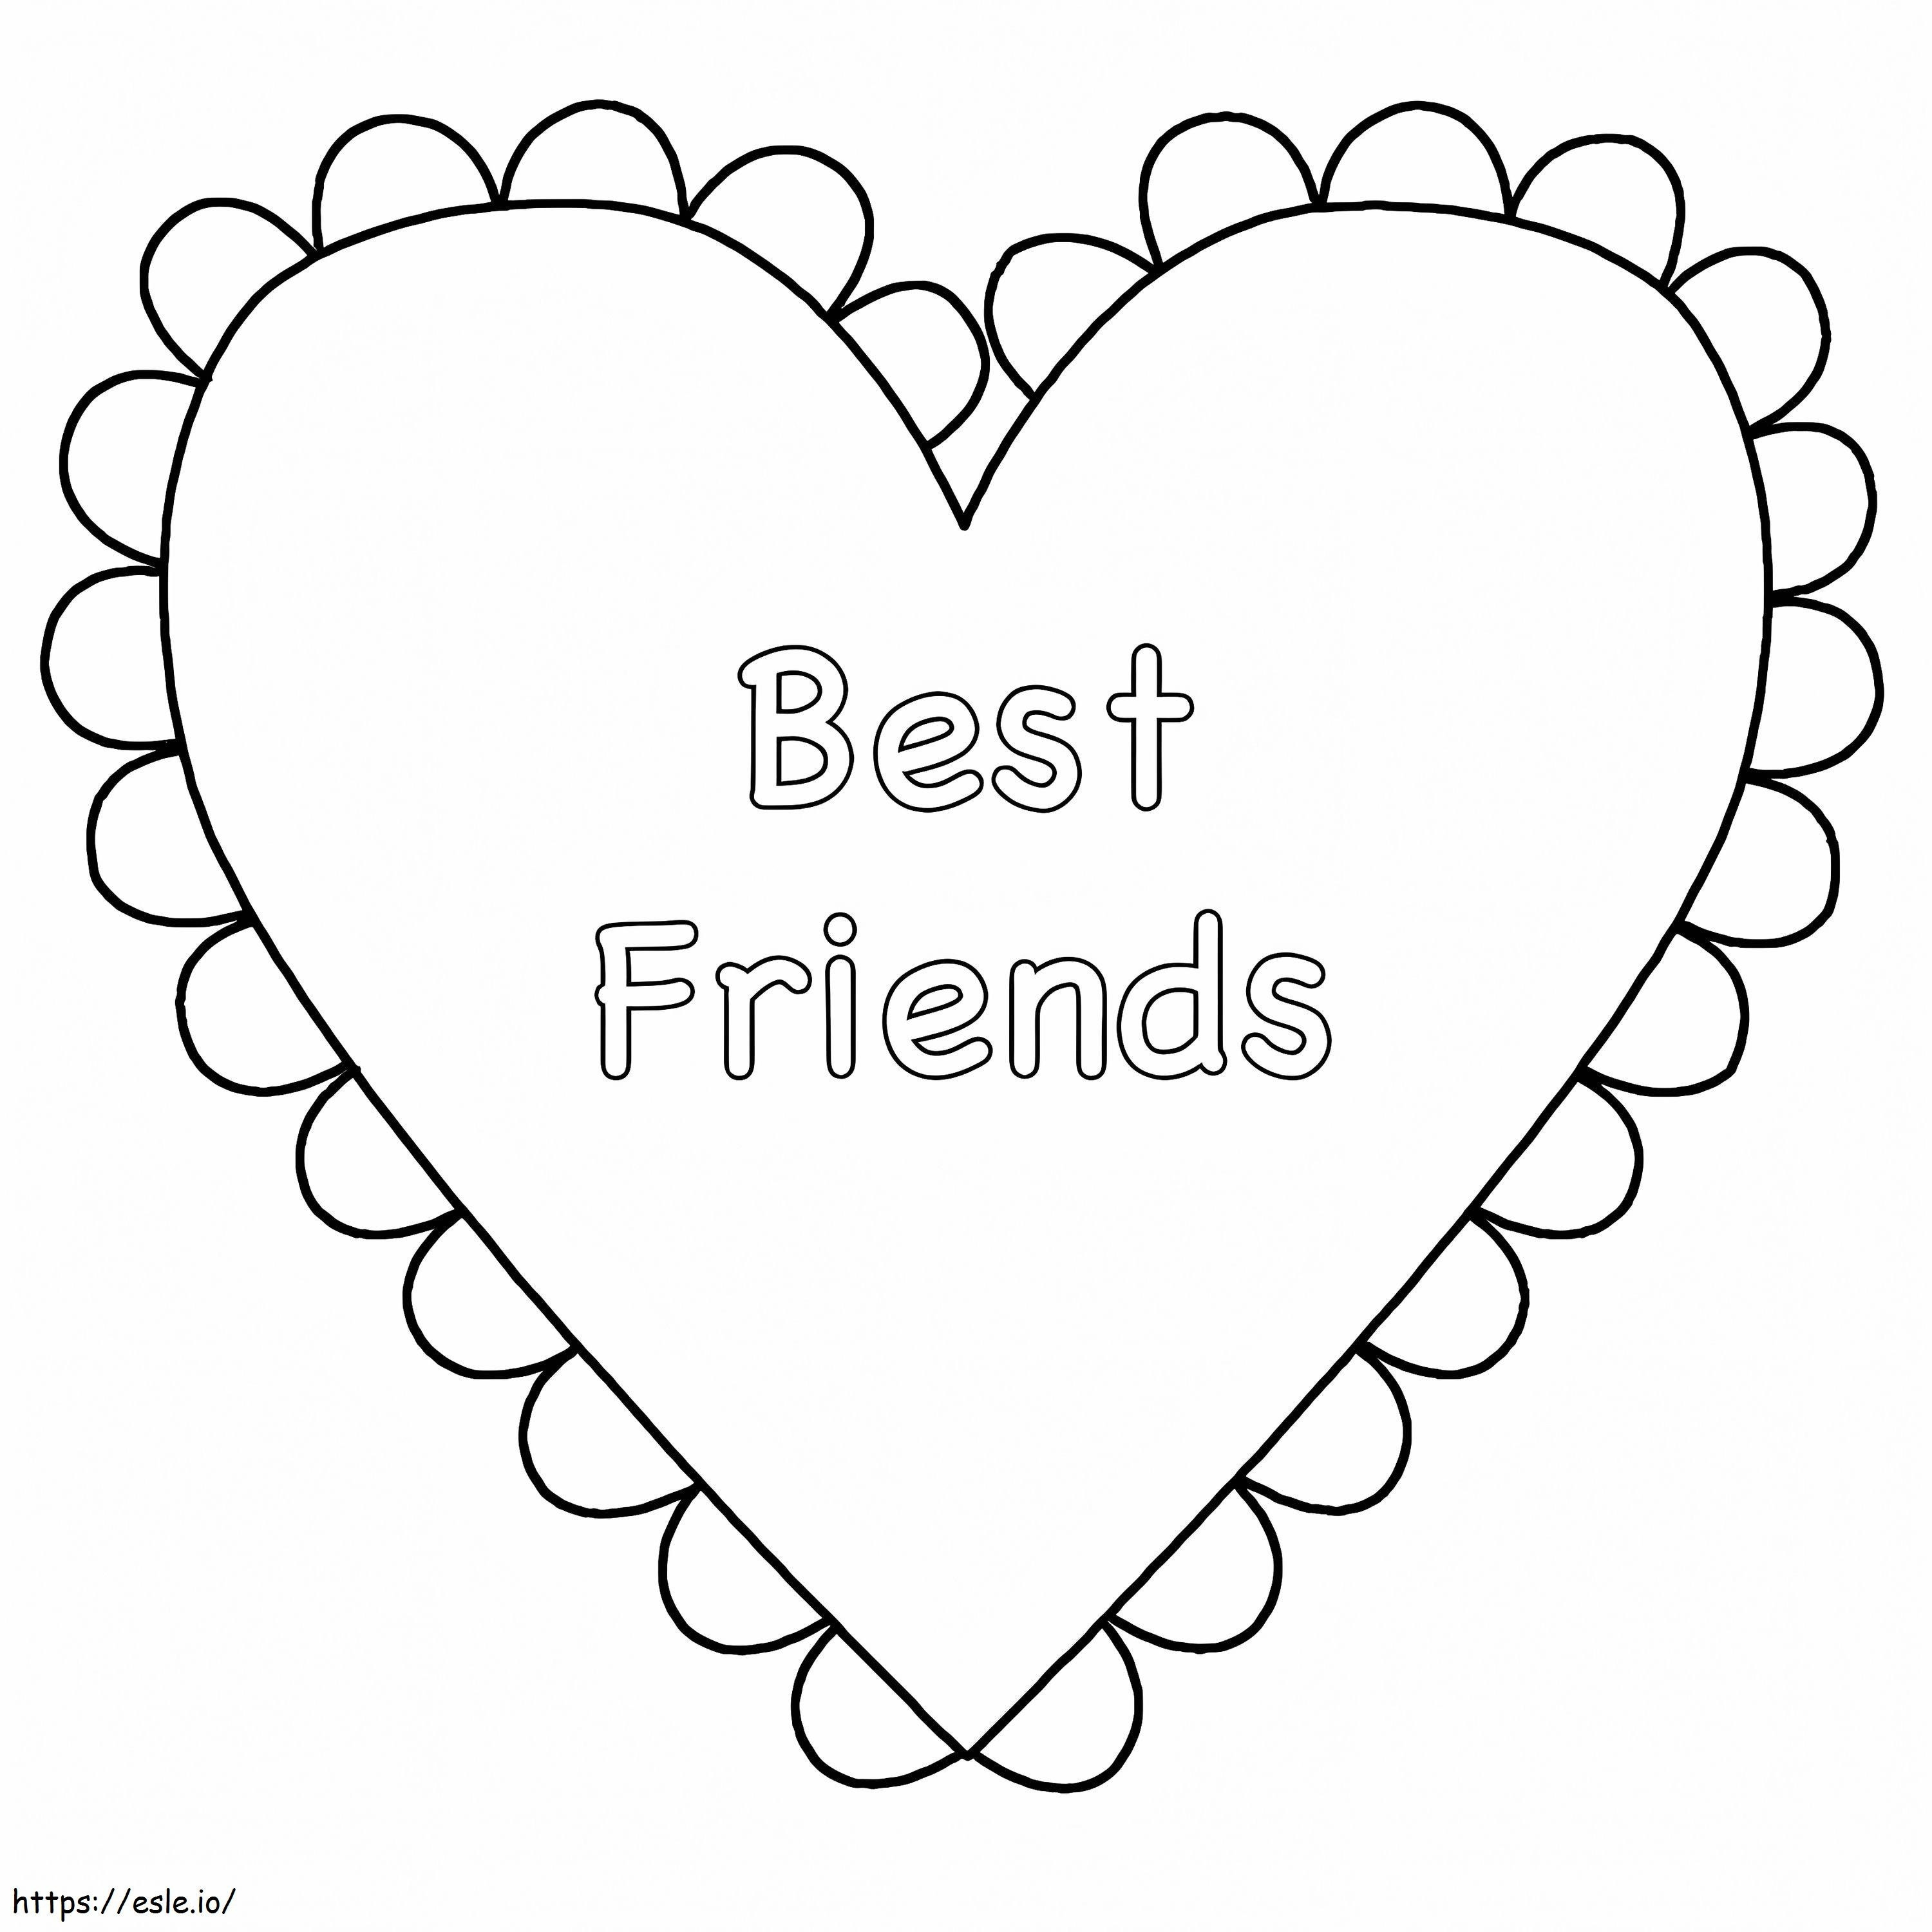 Best Friends Heart coloring page